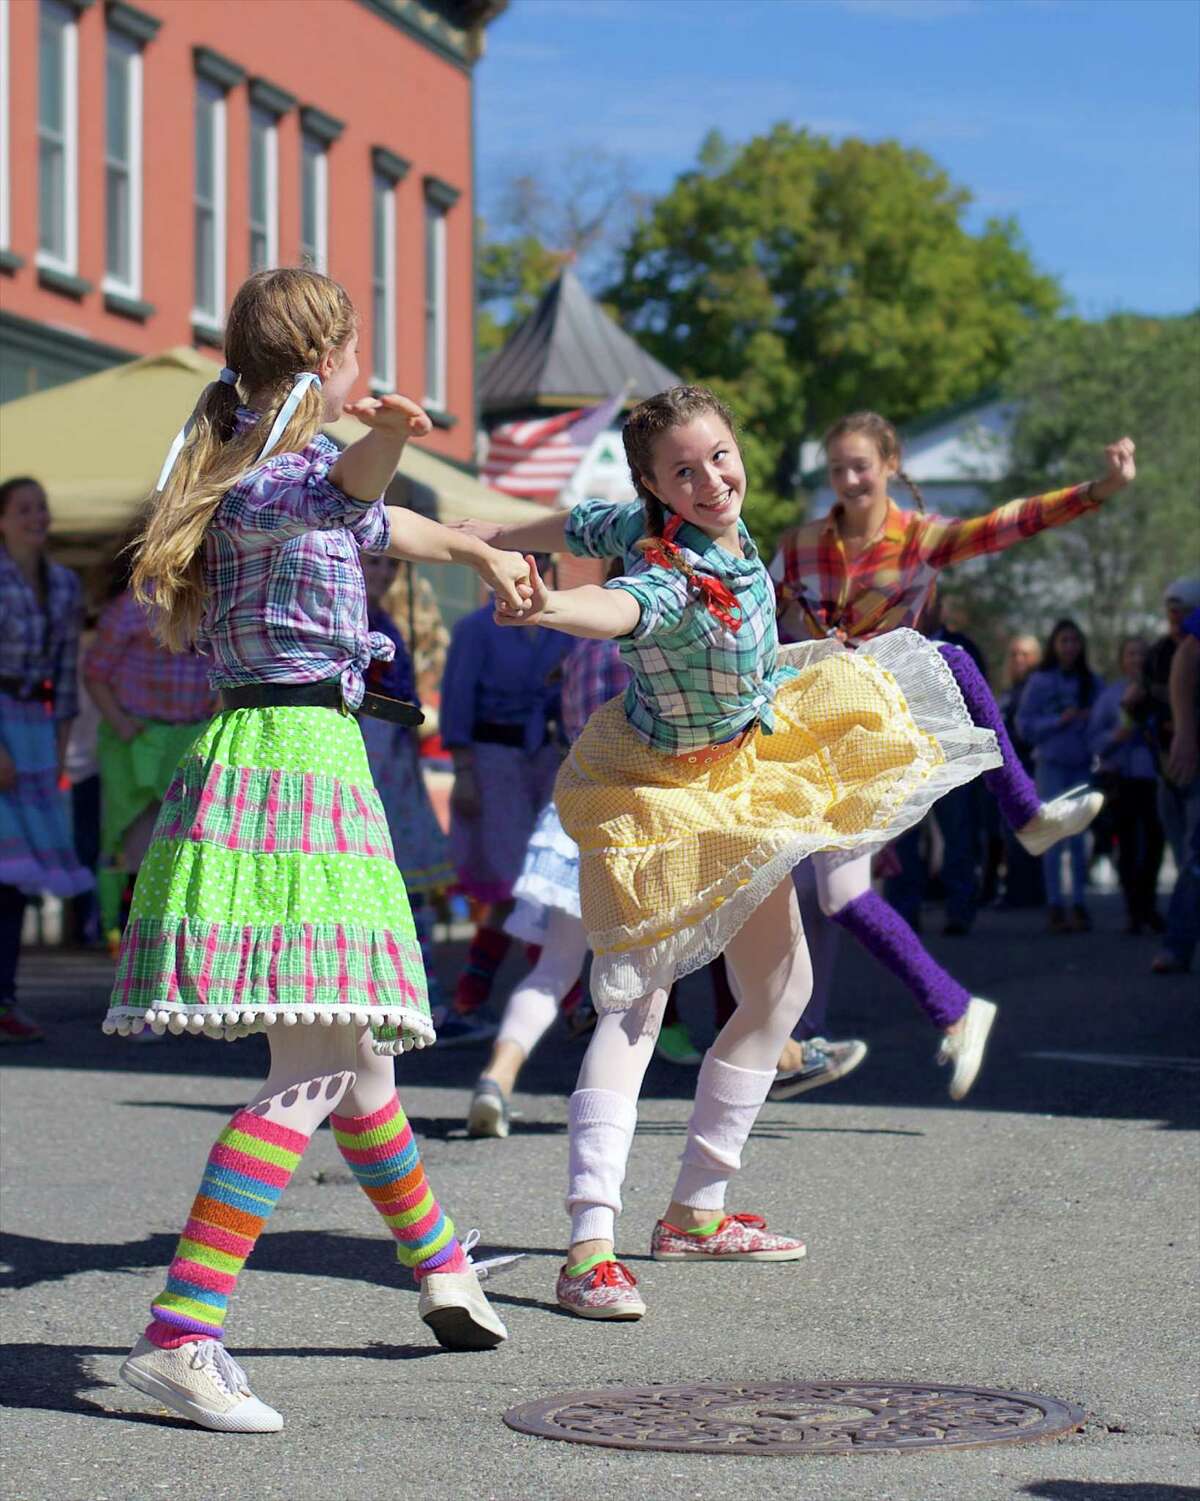 The Greater New Milford Chamber of Commerce hosted the seventh annual Harvest Festival on Sunday, October 4th, 2015, in downtown New Milford. Dancers from AIM (Artists in Motion), in residence at Fineline, took on Bank Street to entertain the crowd. Here, Kiah Liotta and Elena Harcken pair up during a fun hoedown dance on Bank Street.